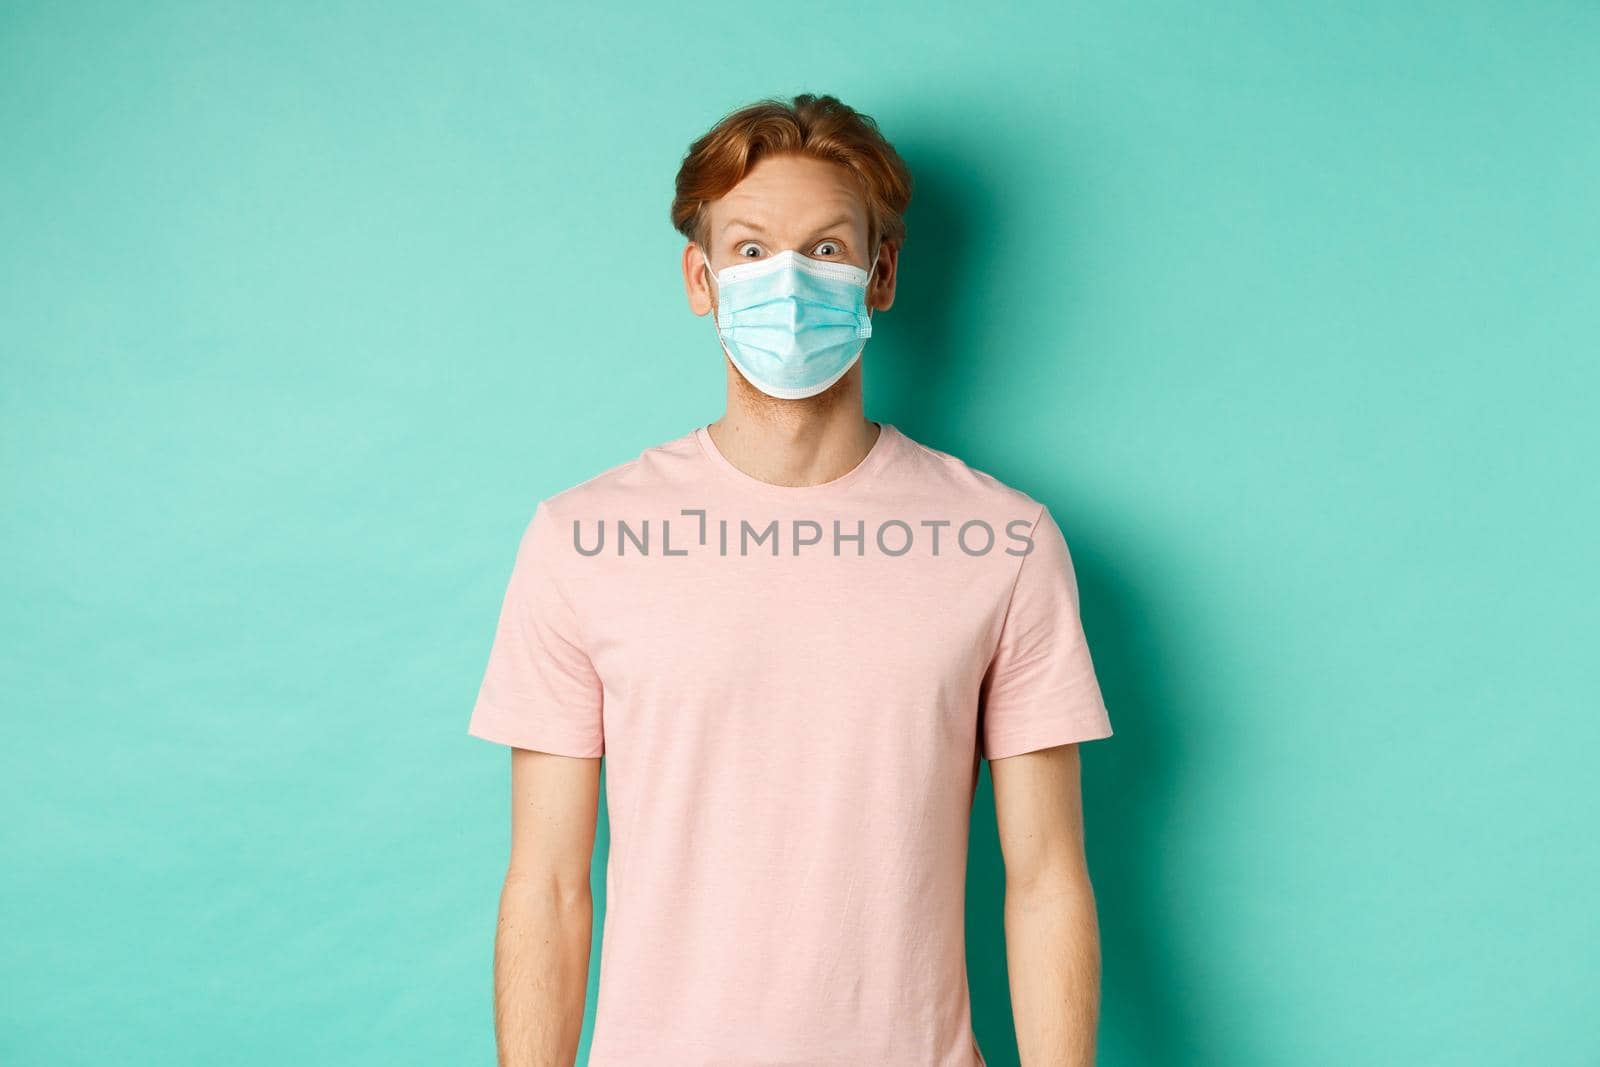 Covid-19, social distancing and quarantine concept. Young man raising eyebrows and looking surprised, wearing face mask during pandemic, standing over mint background.